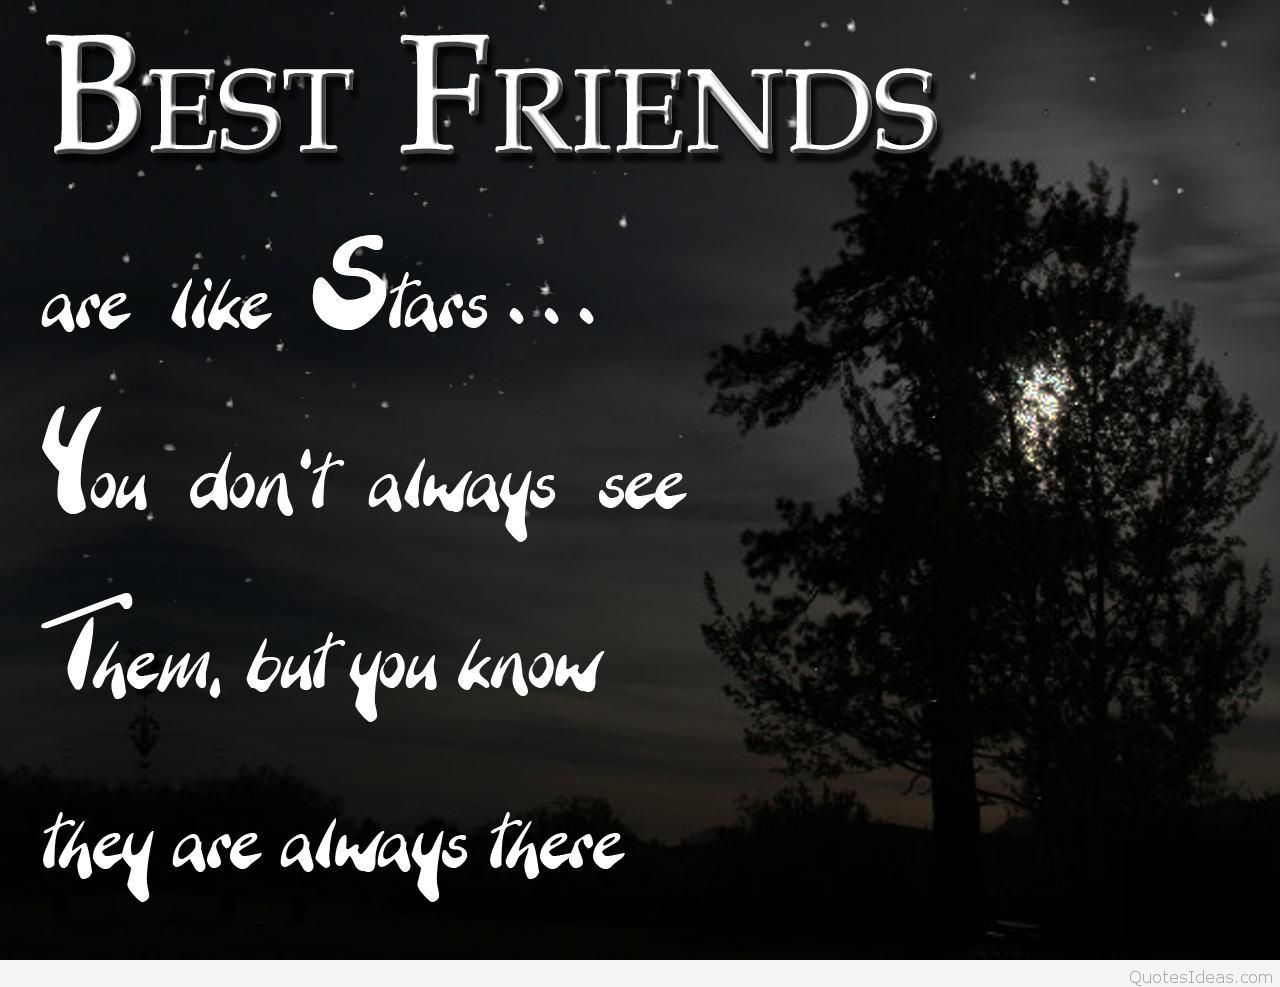 Best Friend Wallpapers With Quotes wwwgalleryhipcom